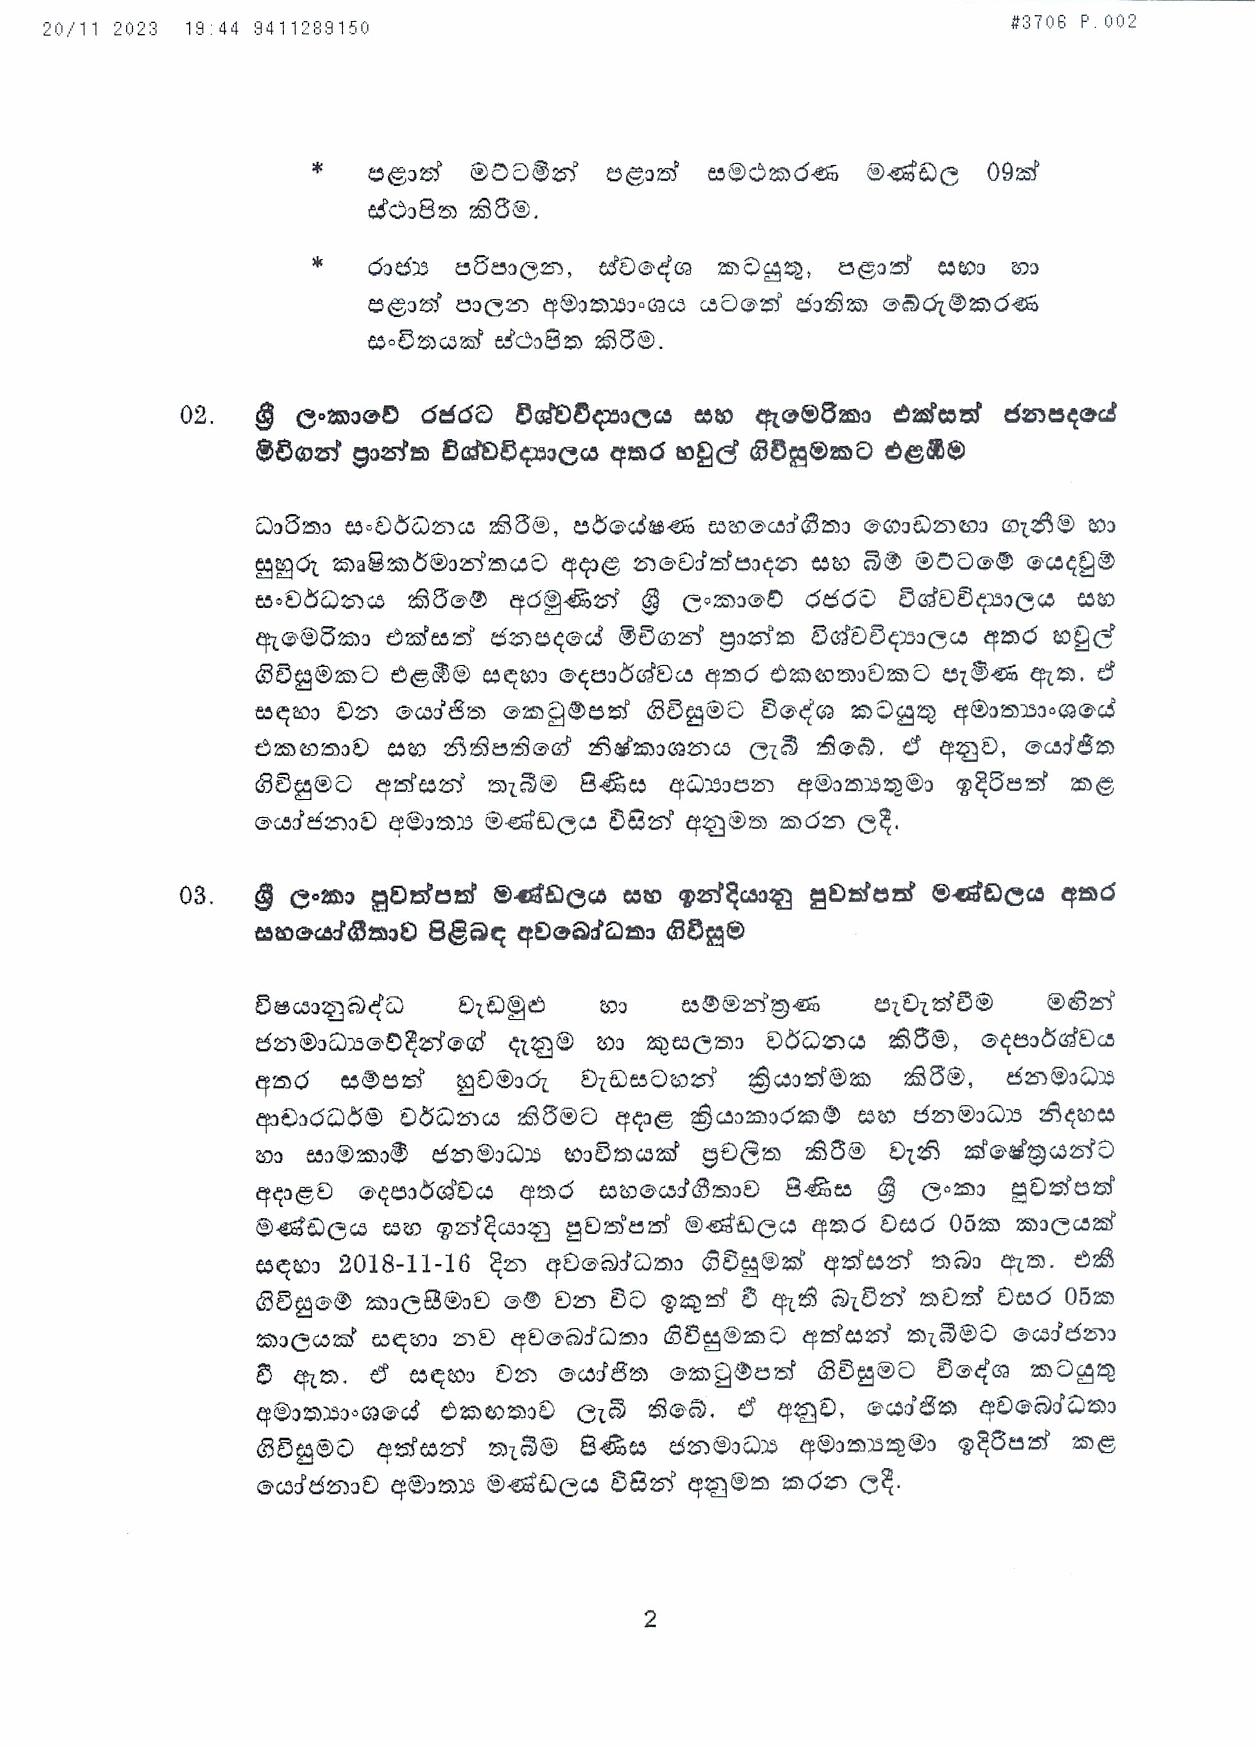 Cabinet Decisions on 20.11.2023 page 002